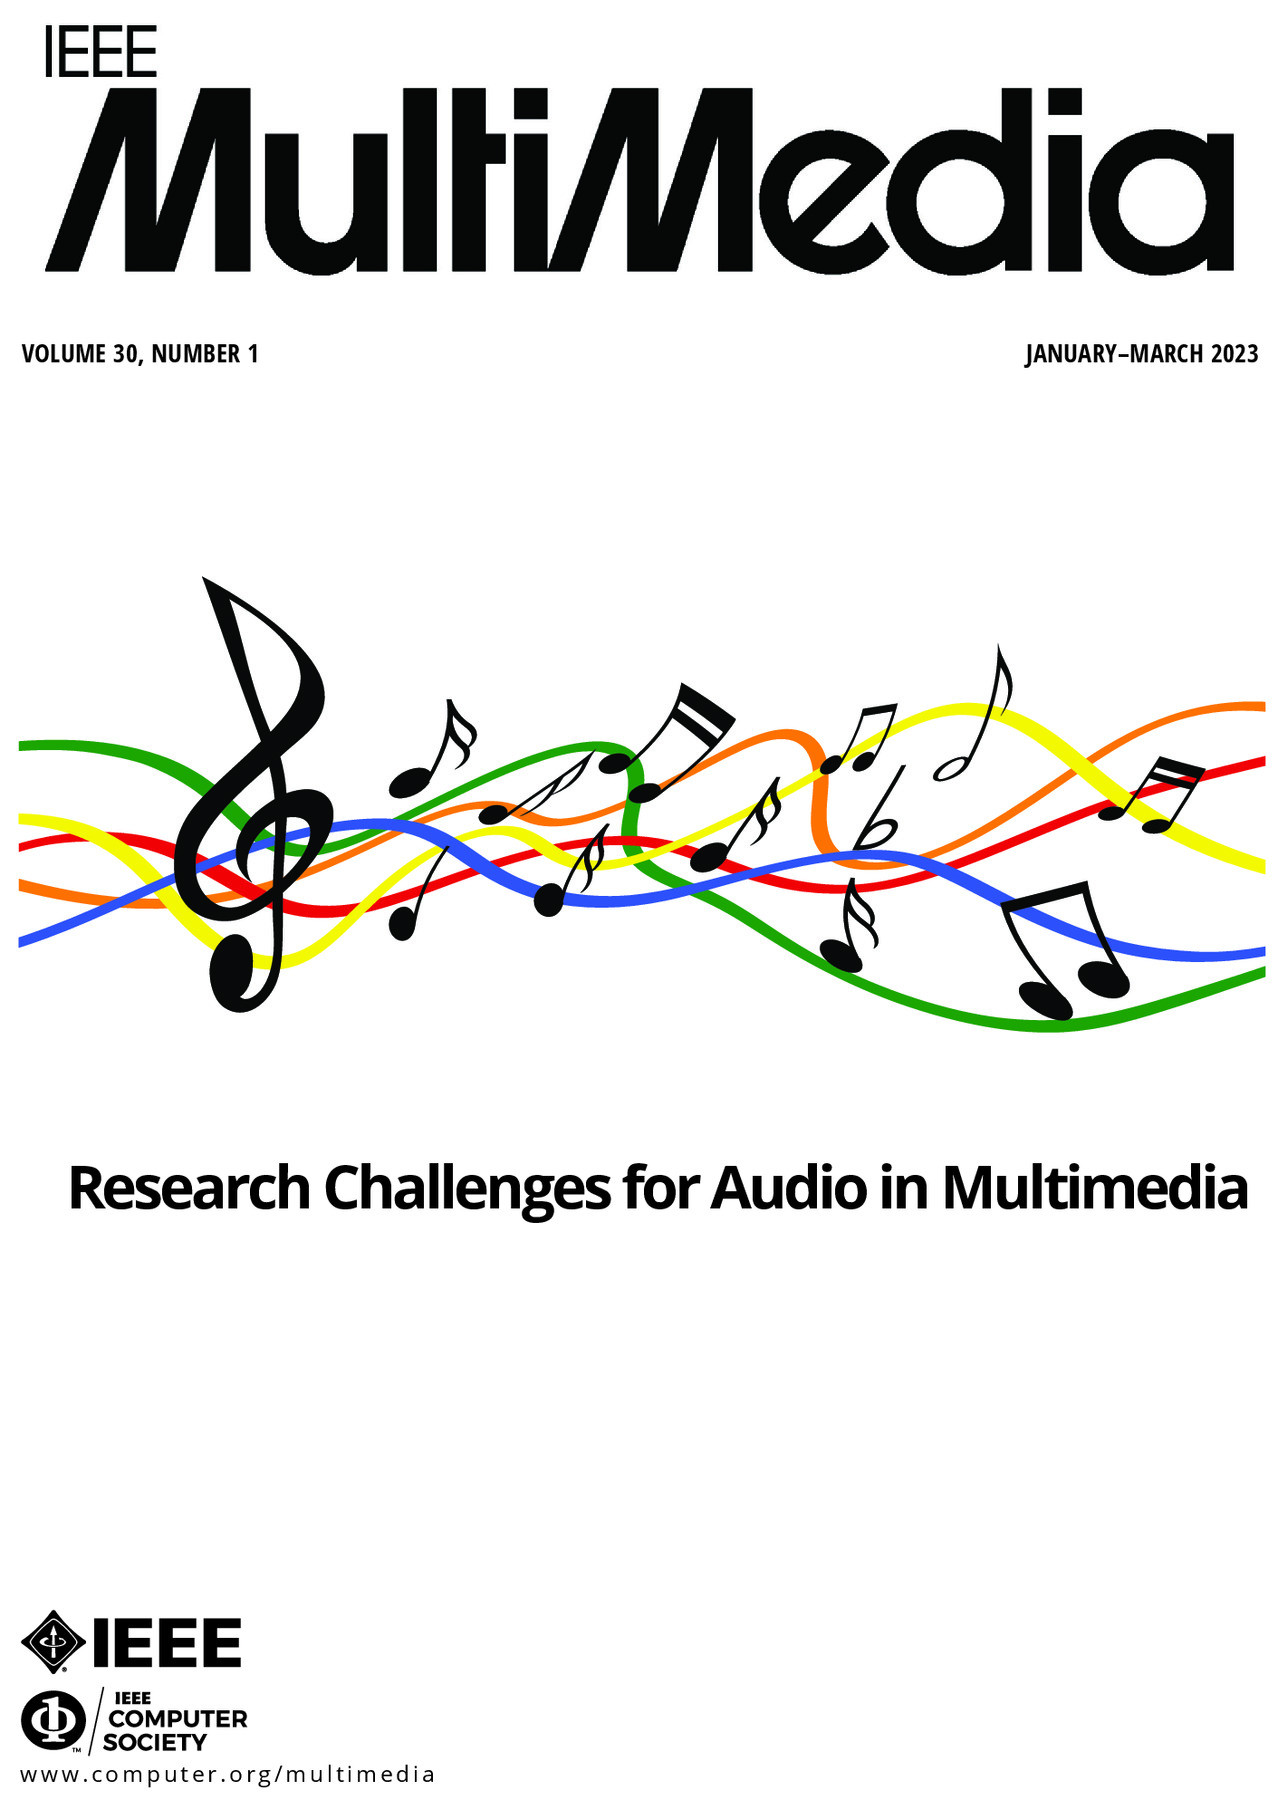 IEEE Multimedia January/February/March 2023 Vol. 30 No. 1